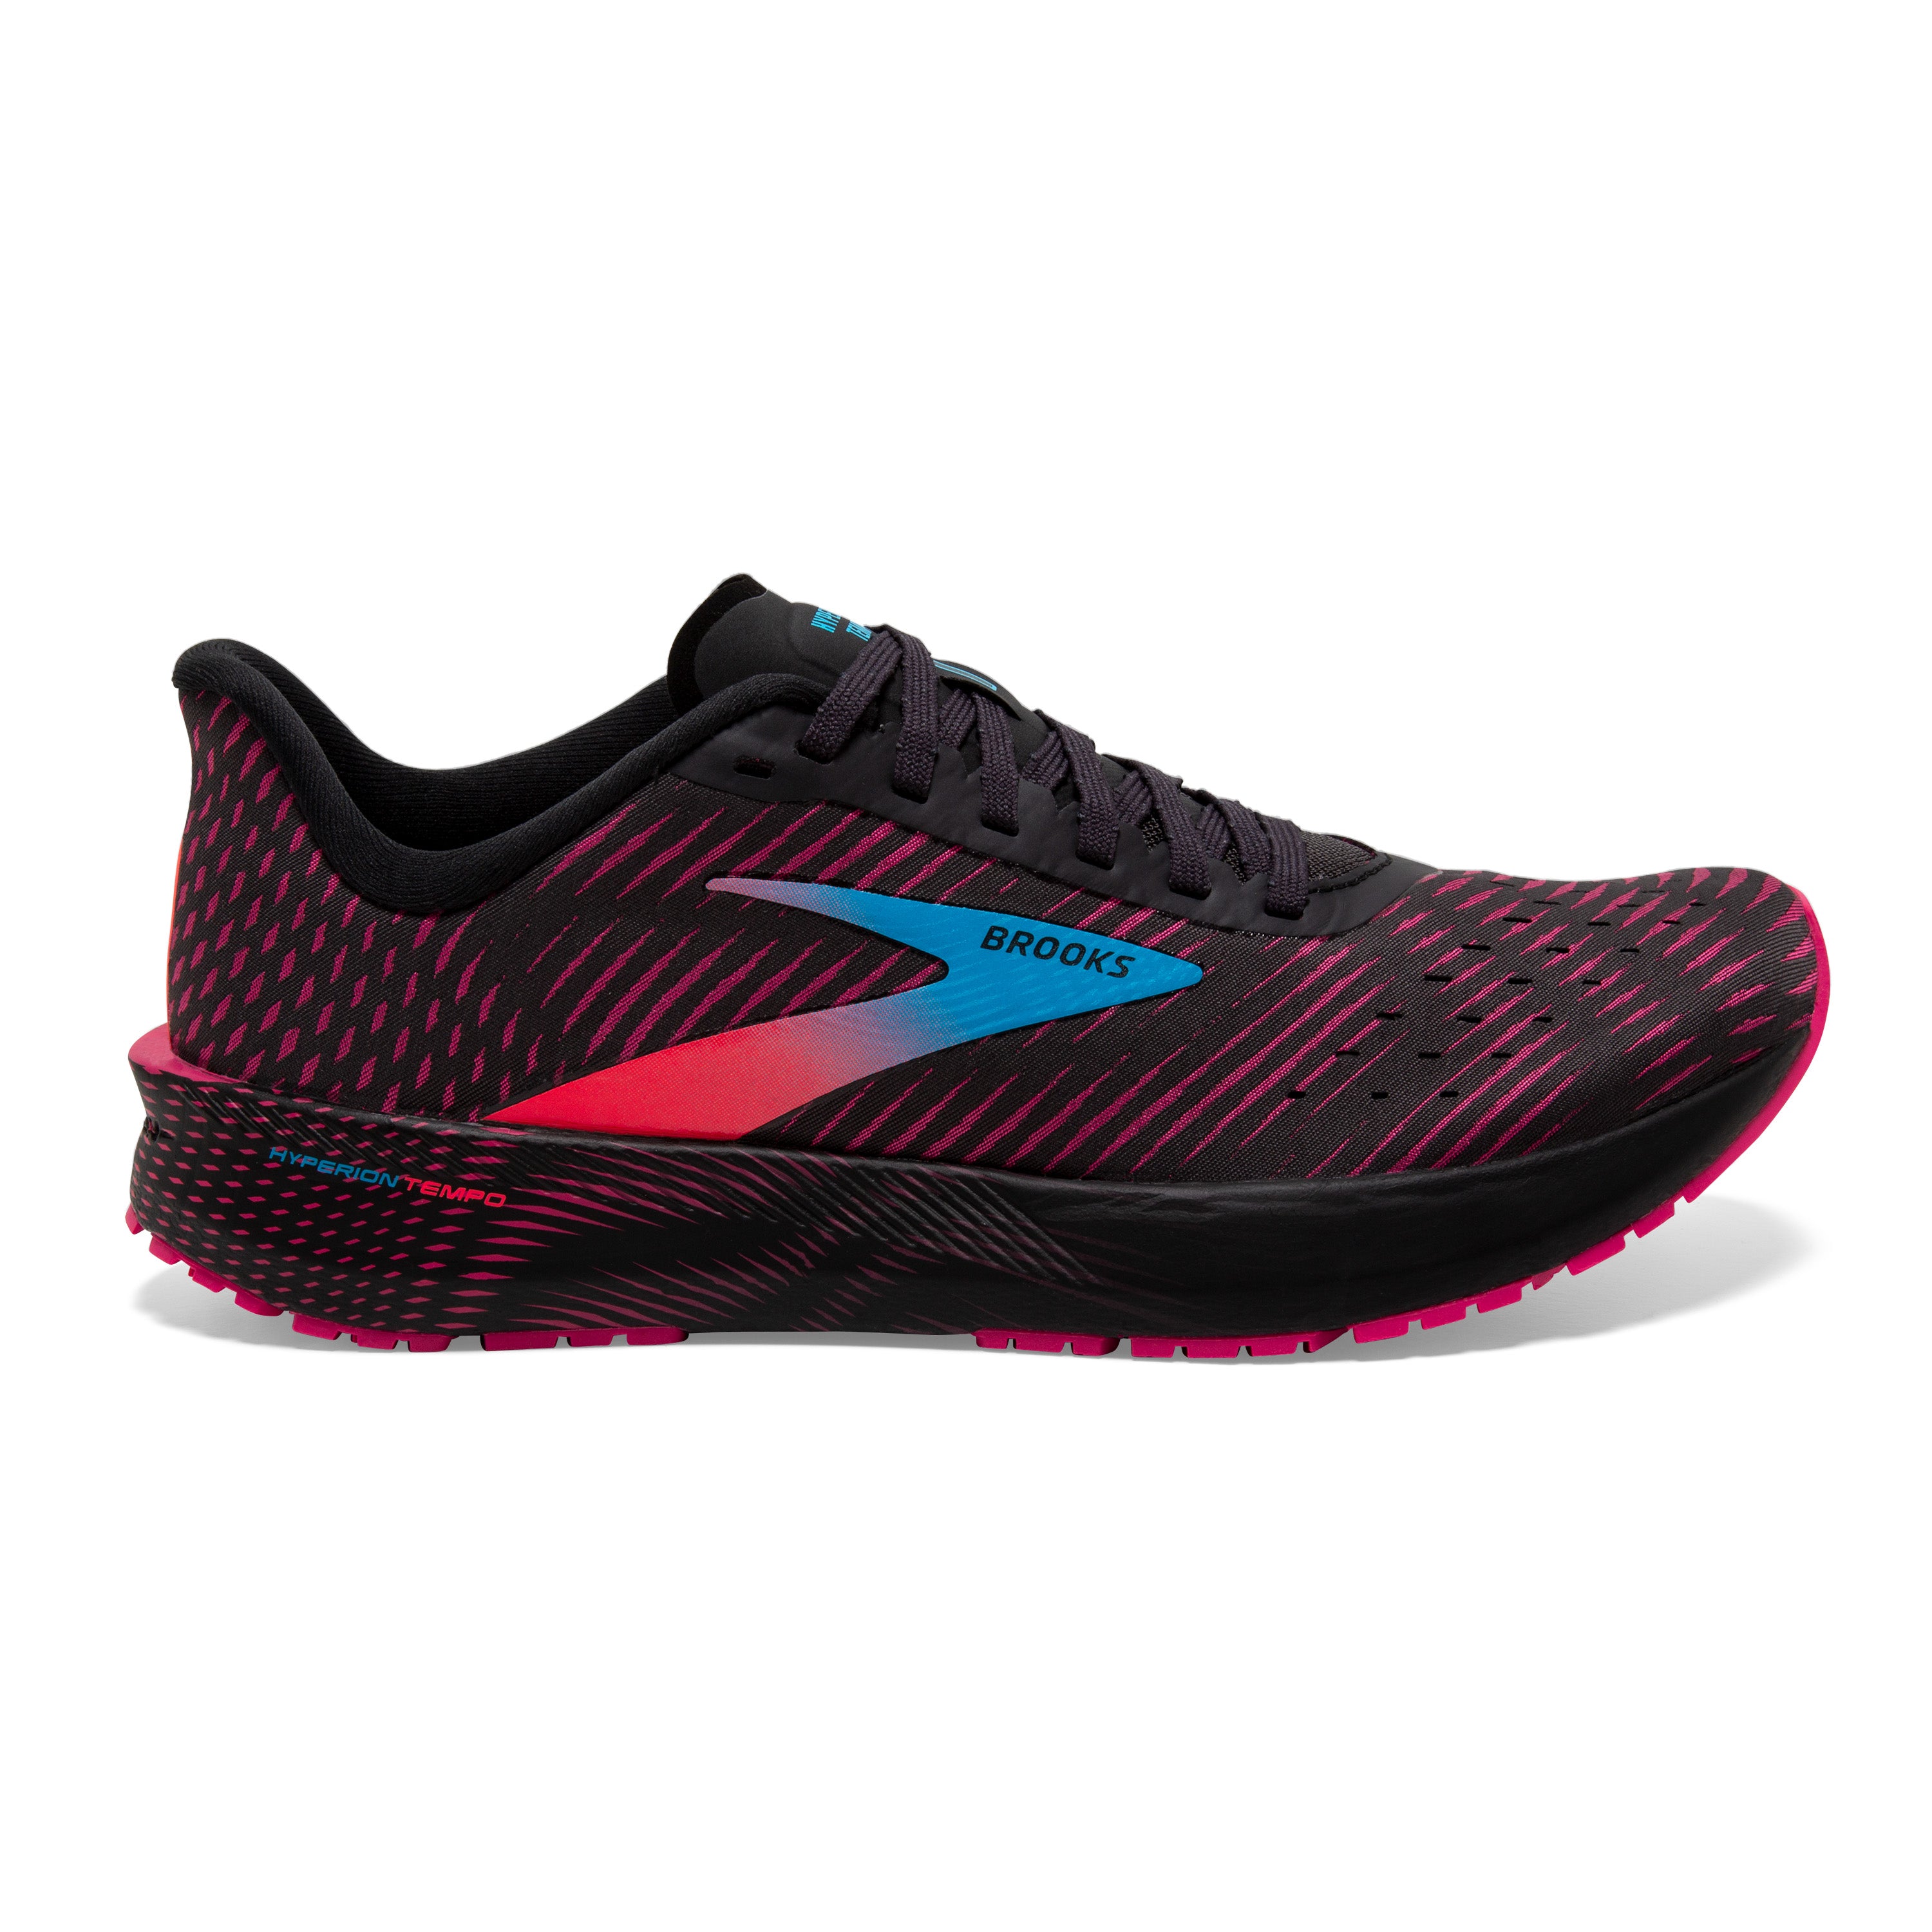 Hyperion Tempo Women's road-running shoes